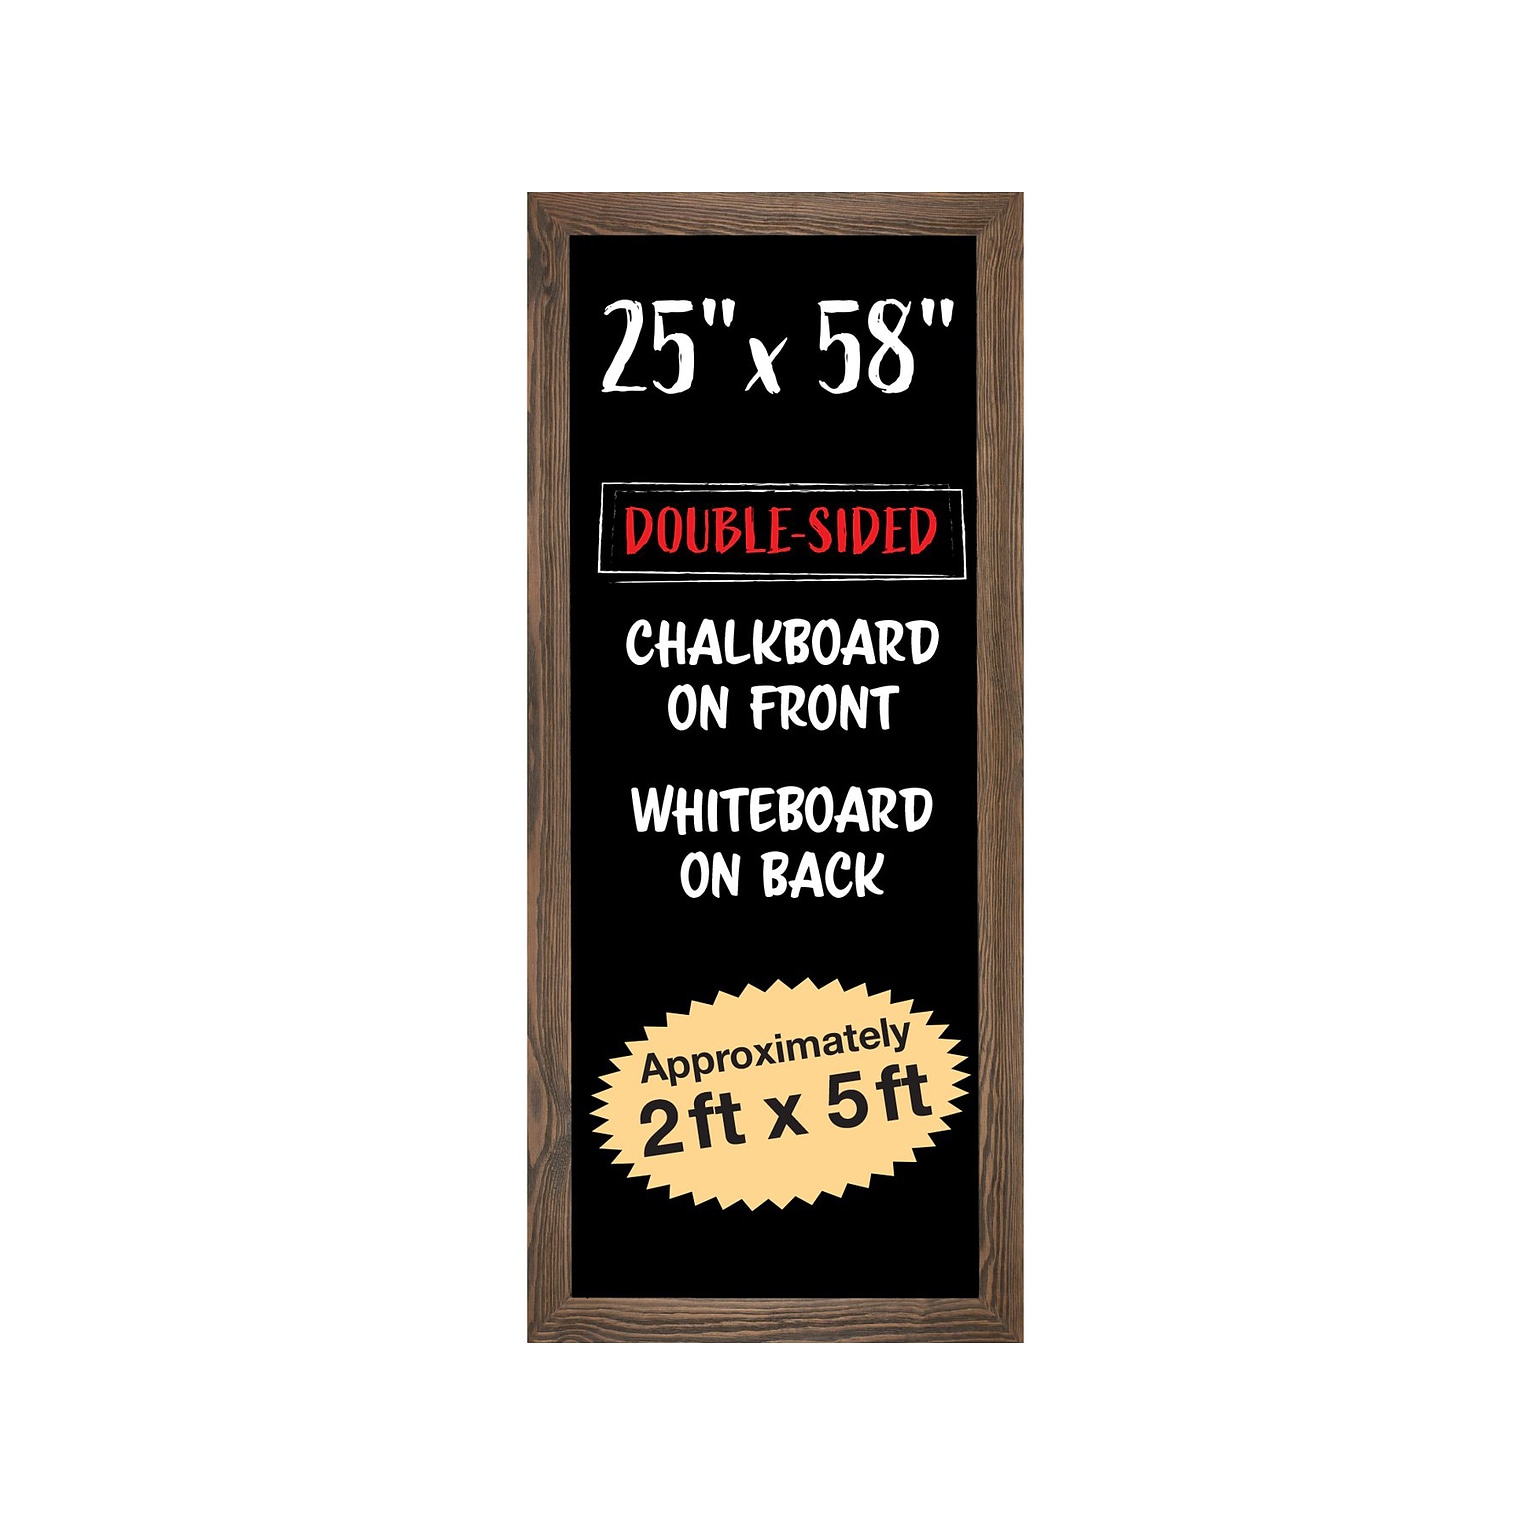 Excello Global Products Hanging Chalkboard/Whiteboard, Rustic, 58 x 25 (EGP-HD-0195-OS)